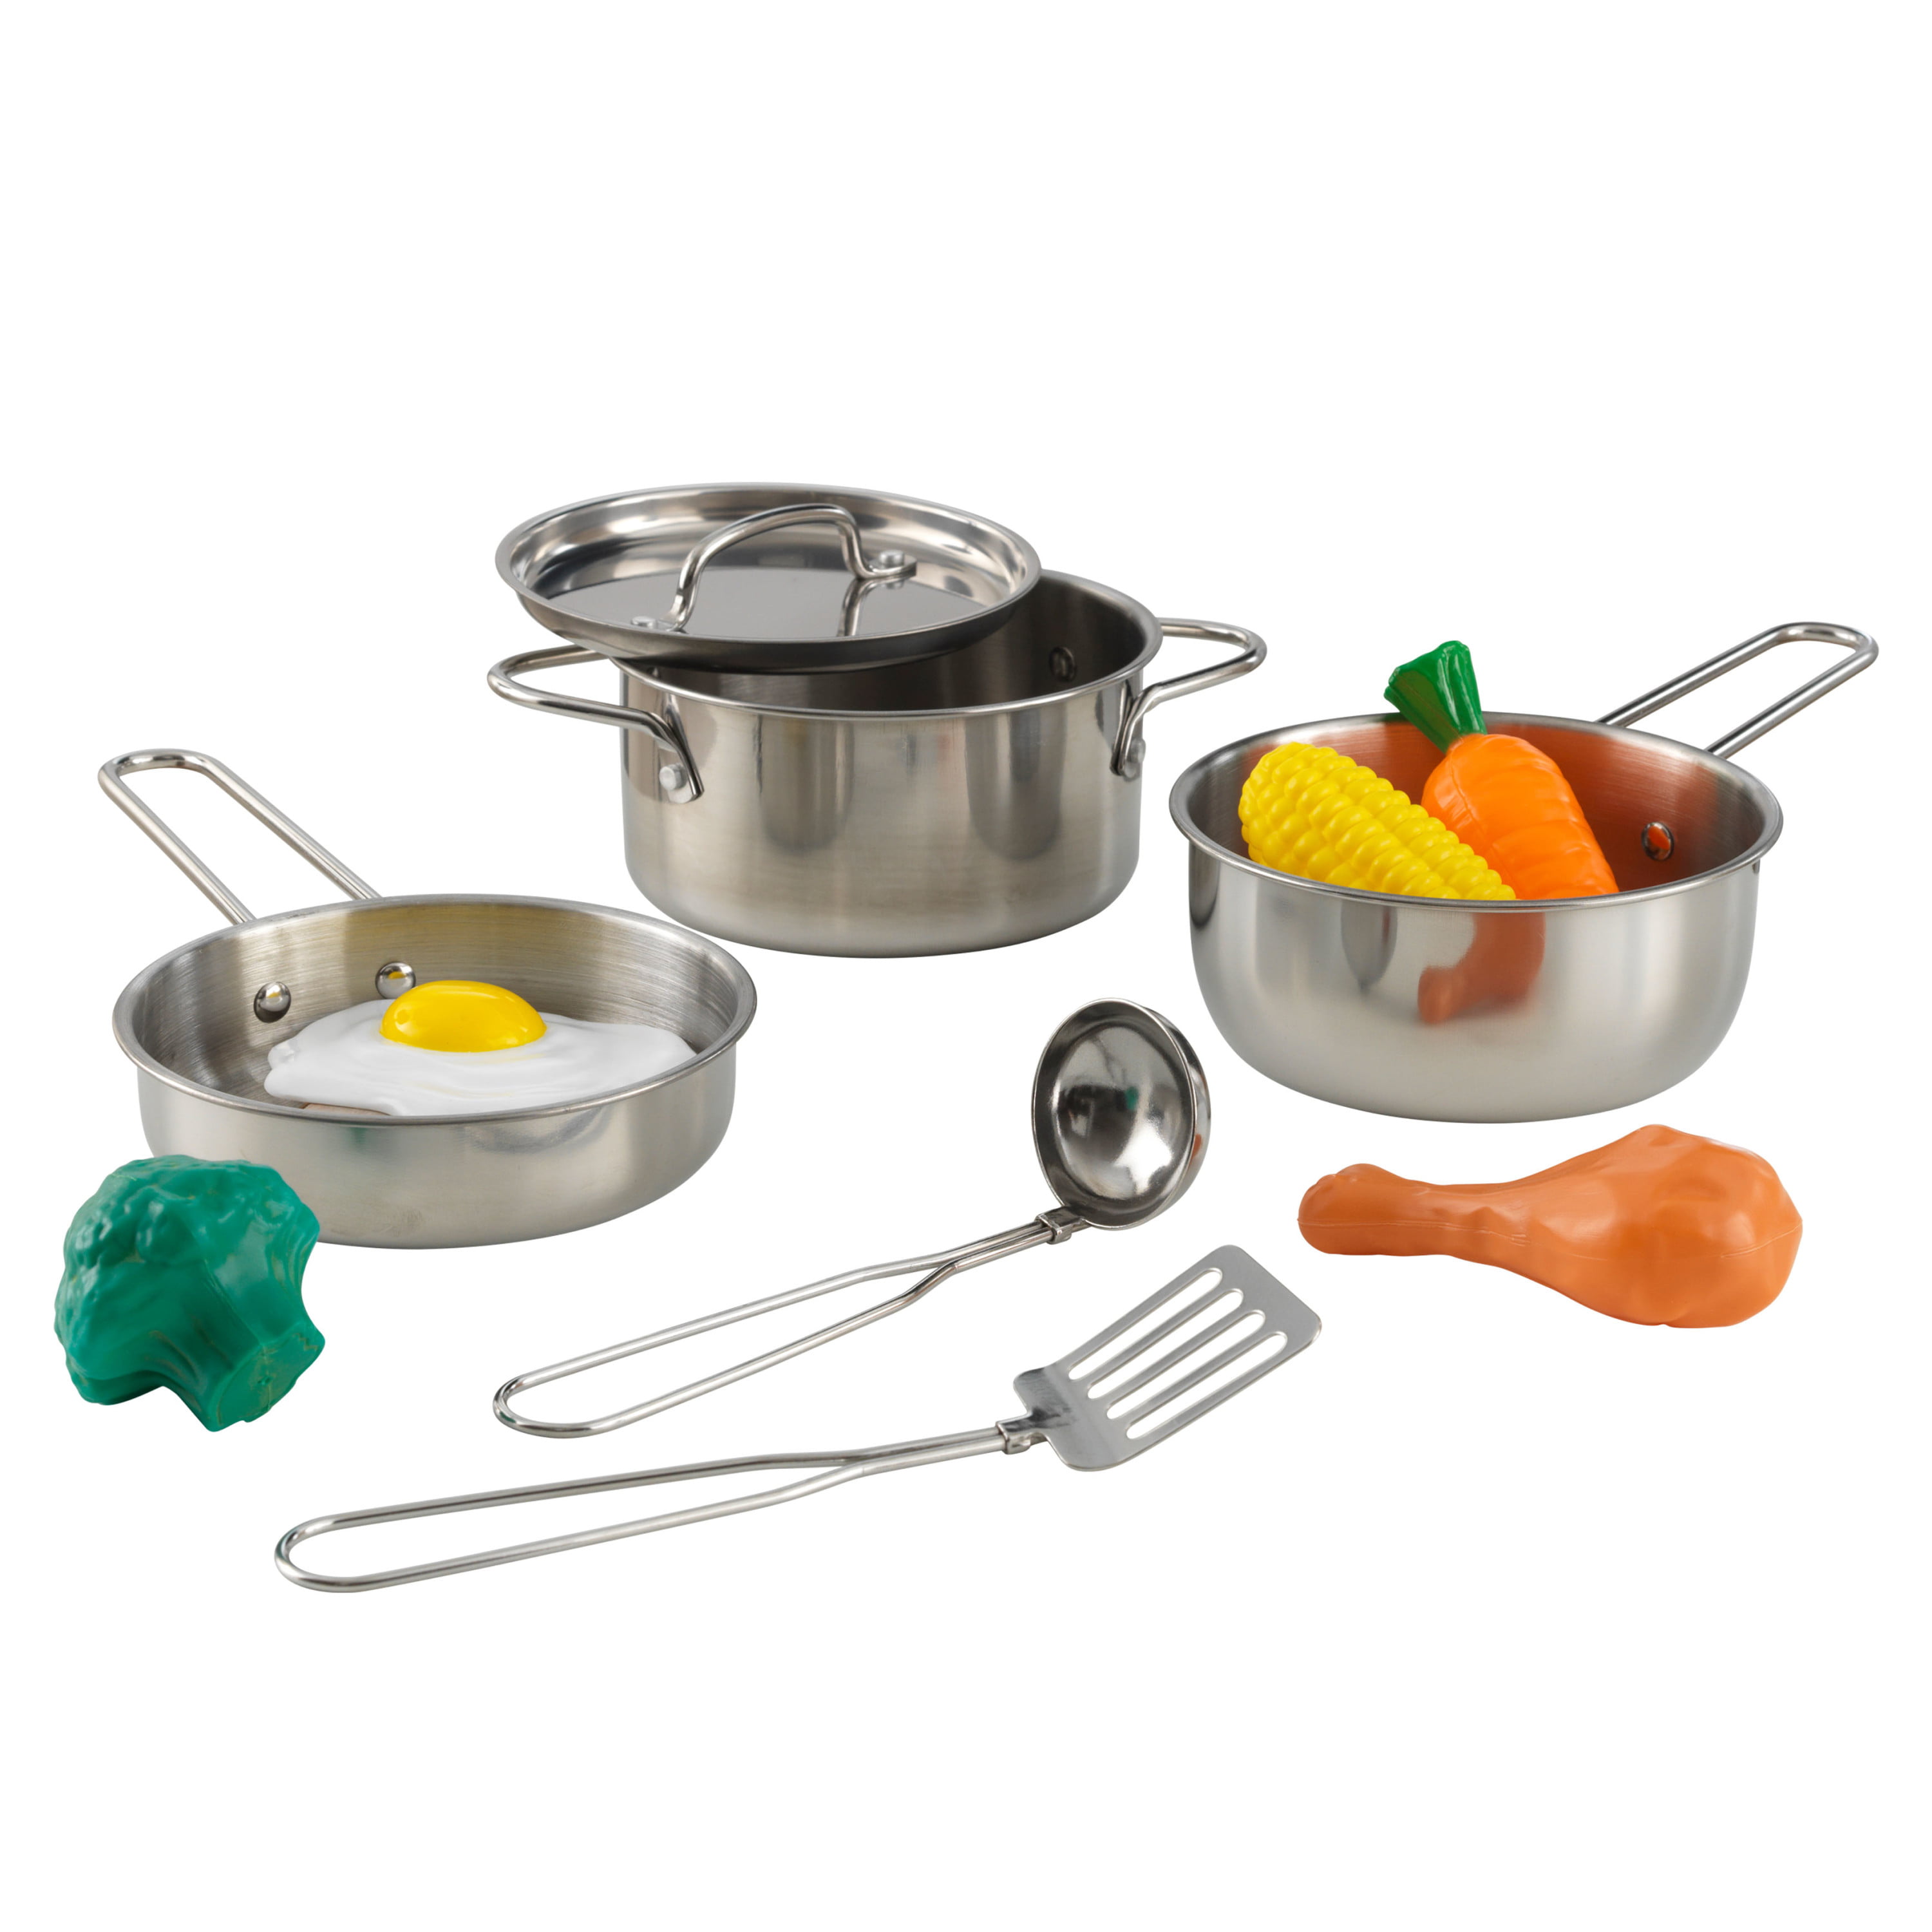 Deluxe 11-Piece Cookware Set with Food by KidKraft 